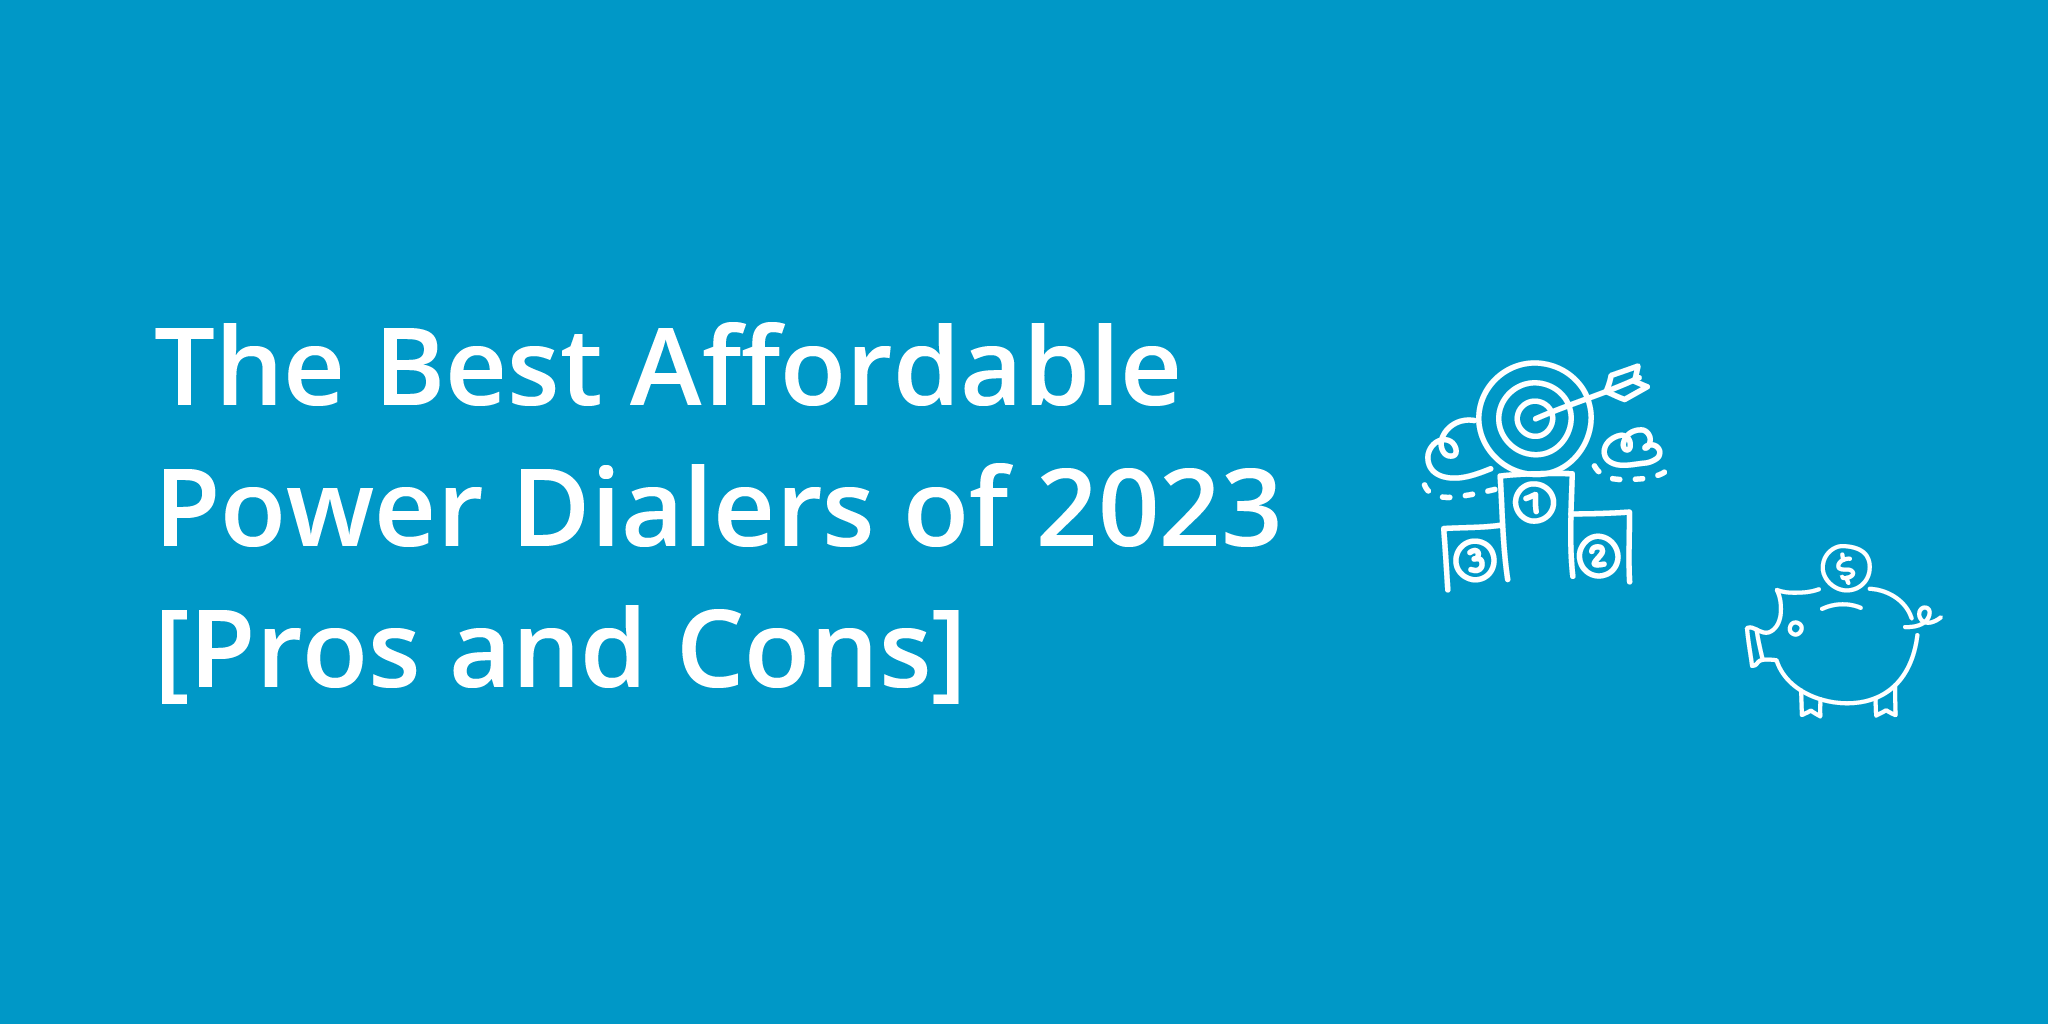 The Best Affordable Power Dialers of 2023 | Telephones for business